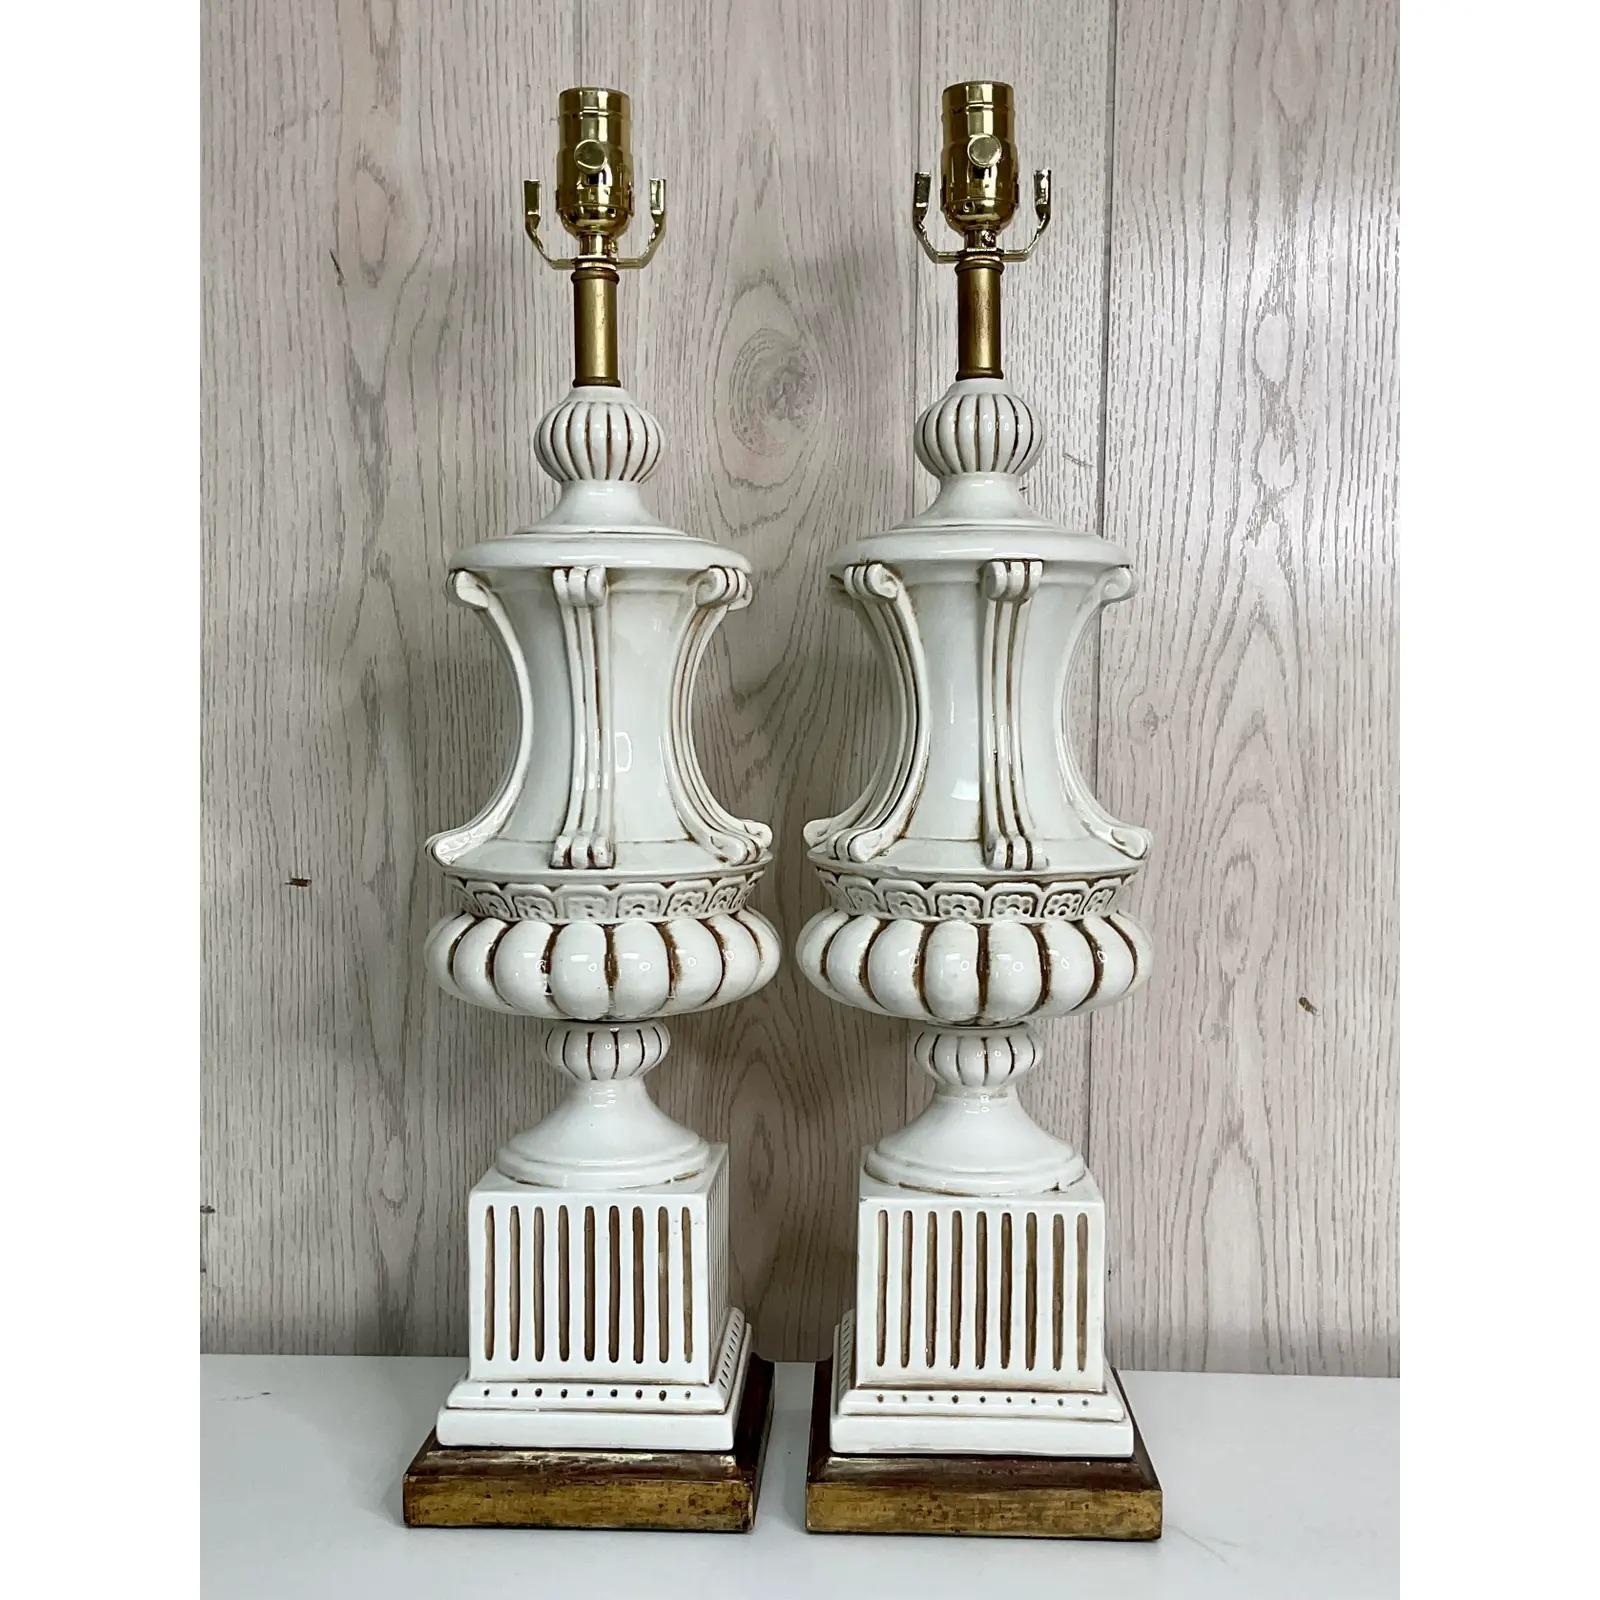 Vintage Italian Glazed Ceramic Urn Lamps - a Pair For Sale 6